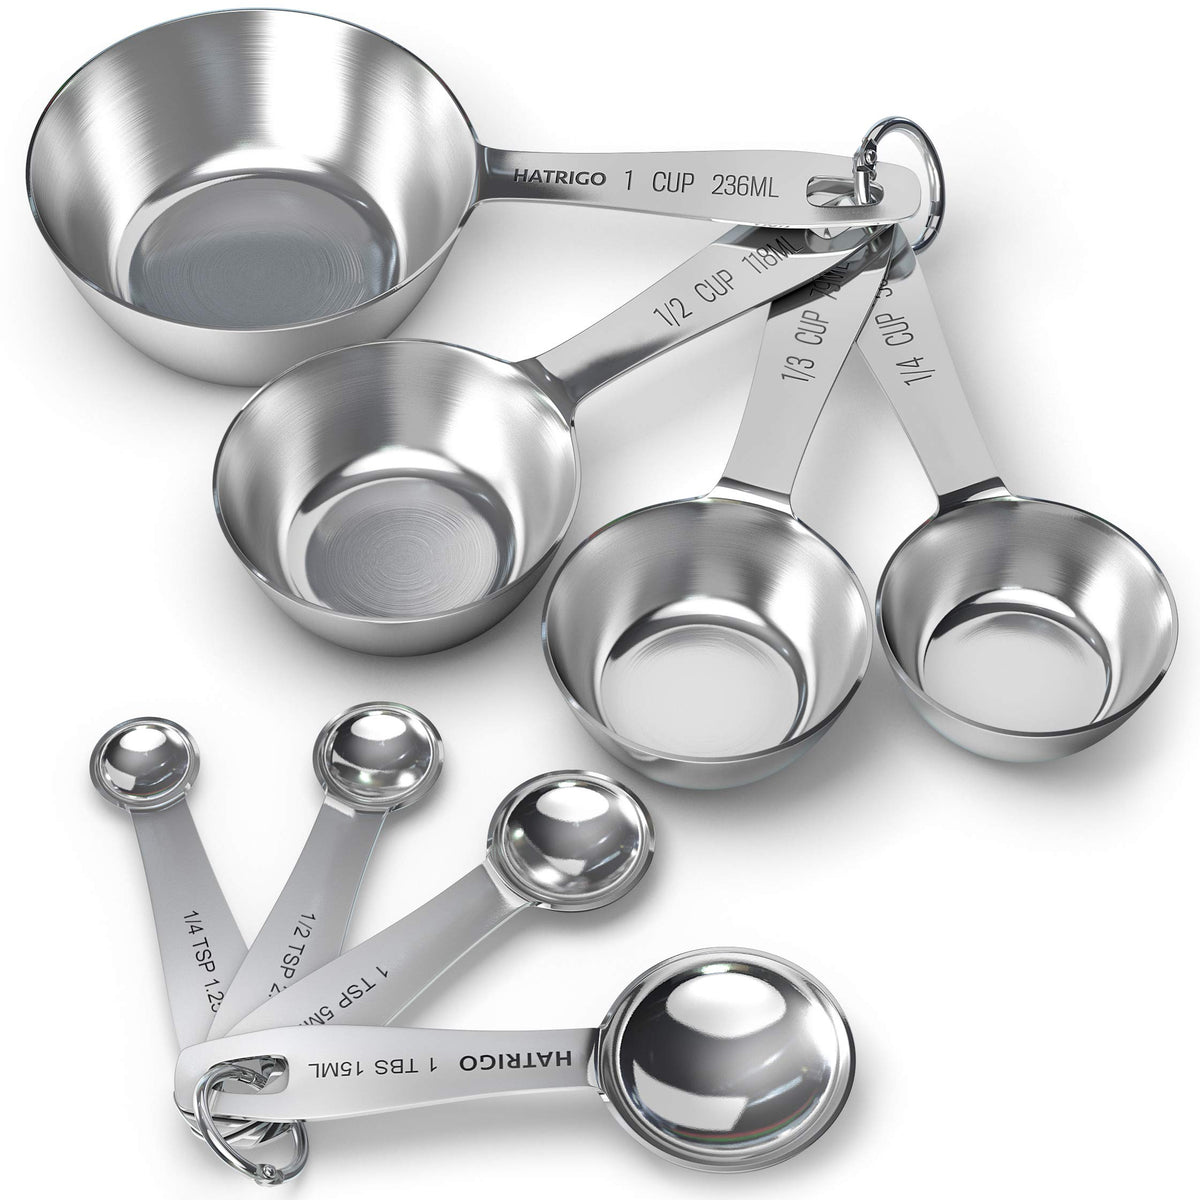  Heavy Duty Professional 10-pc Stainless Steel Measuring Cups  and Spoons Set with Riveted Handles, Polished Stackable Measuring Cup and Measuring  Spoon, Thick Gauge Steel, Built to Last a Lifetime: Home 